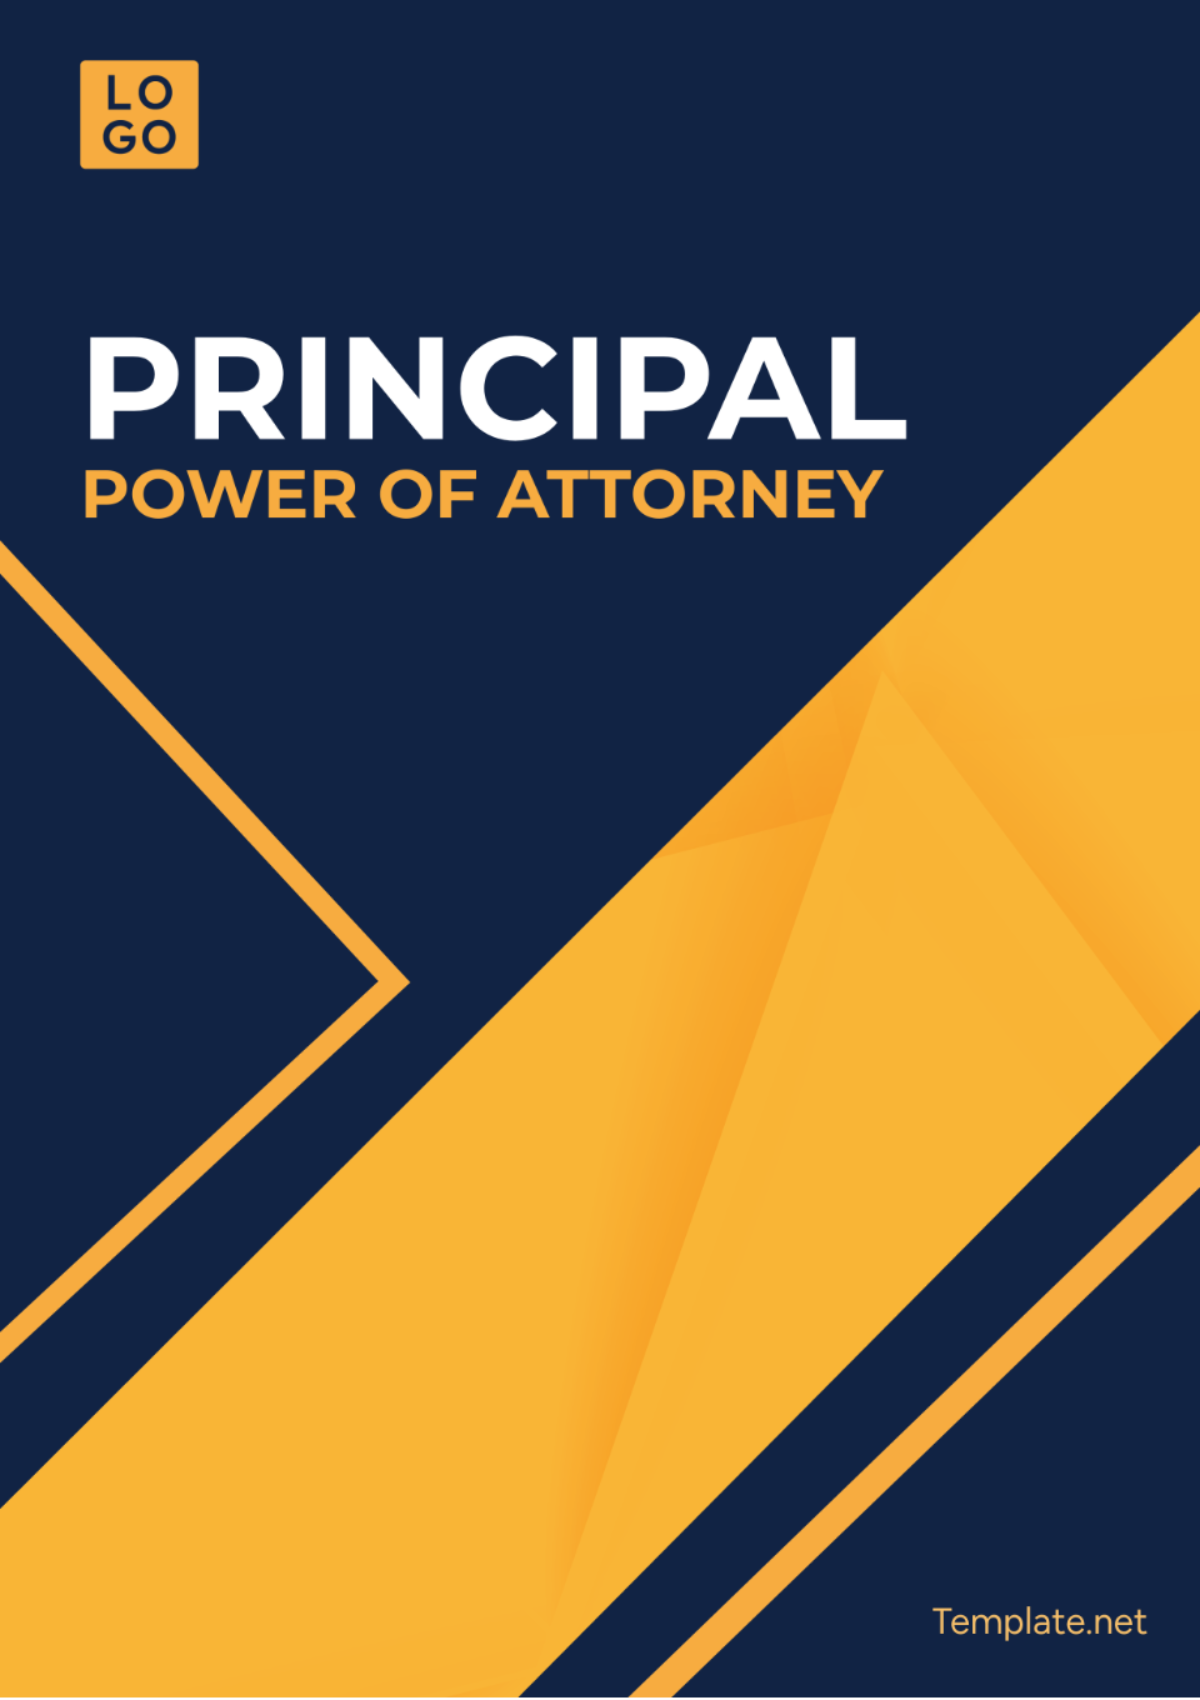 Principal Power of Attorney Template